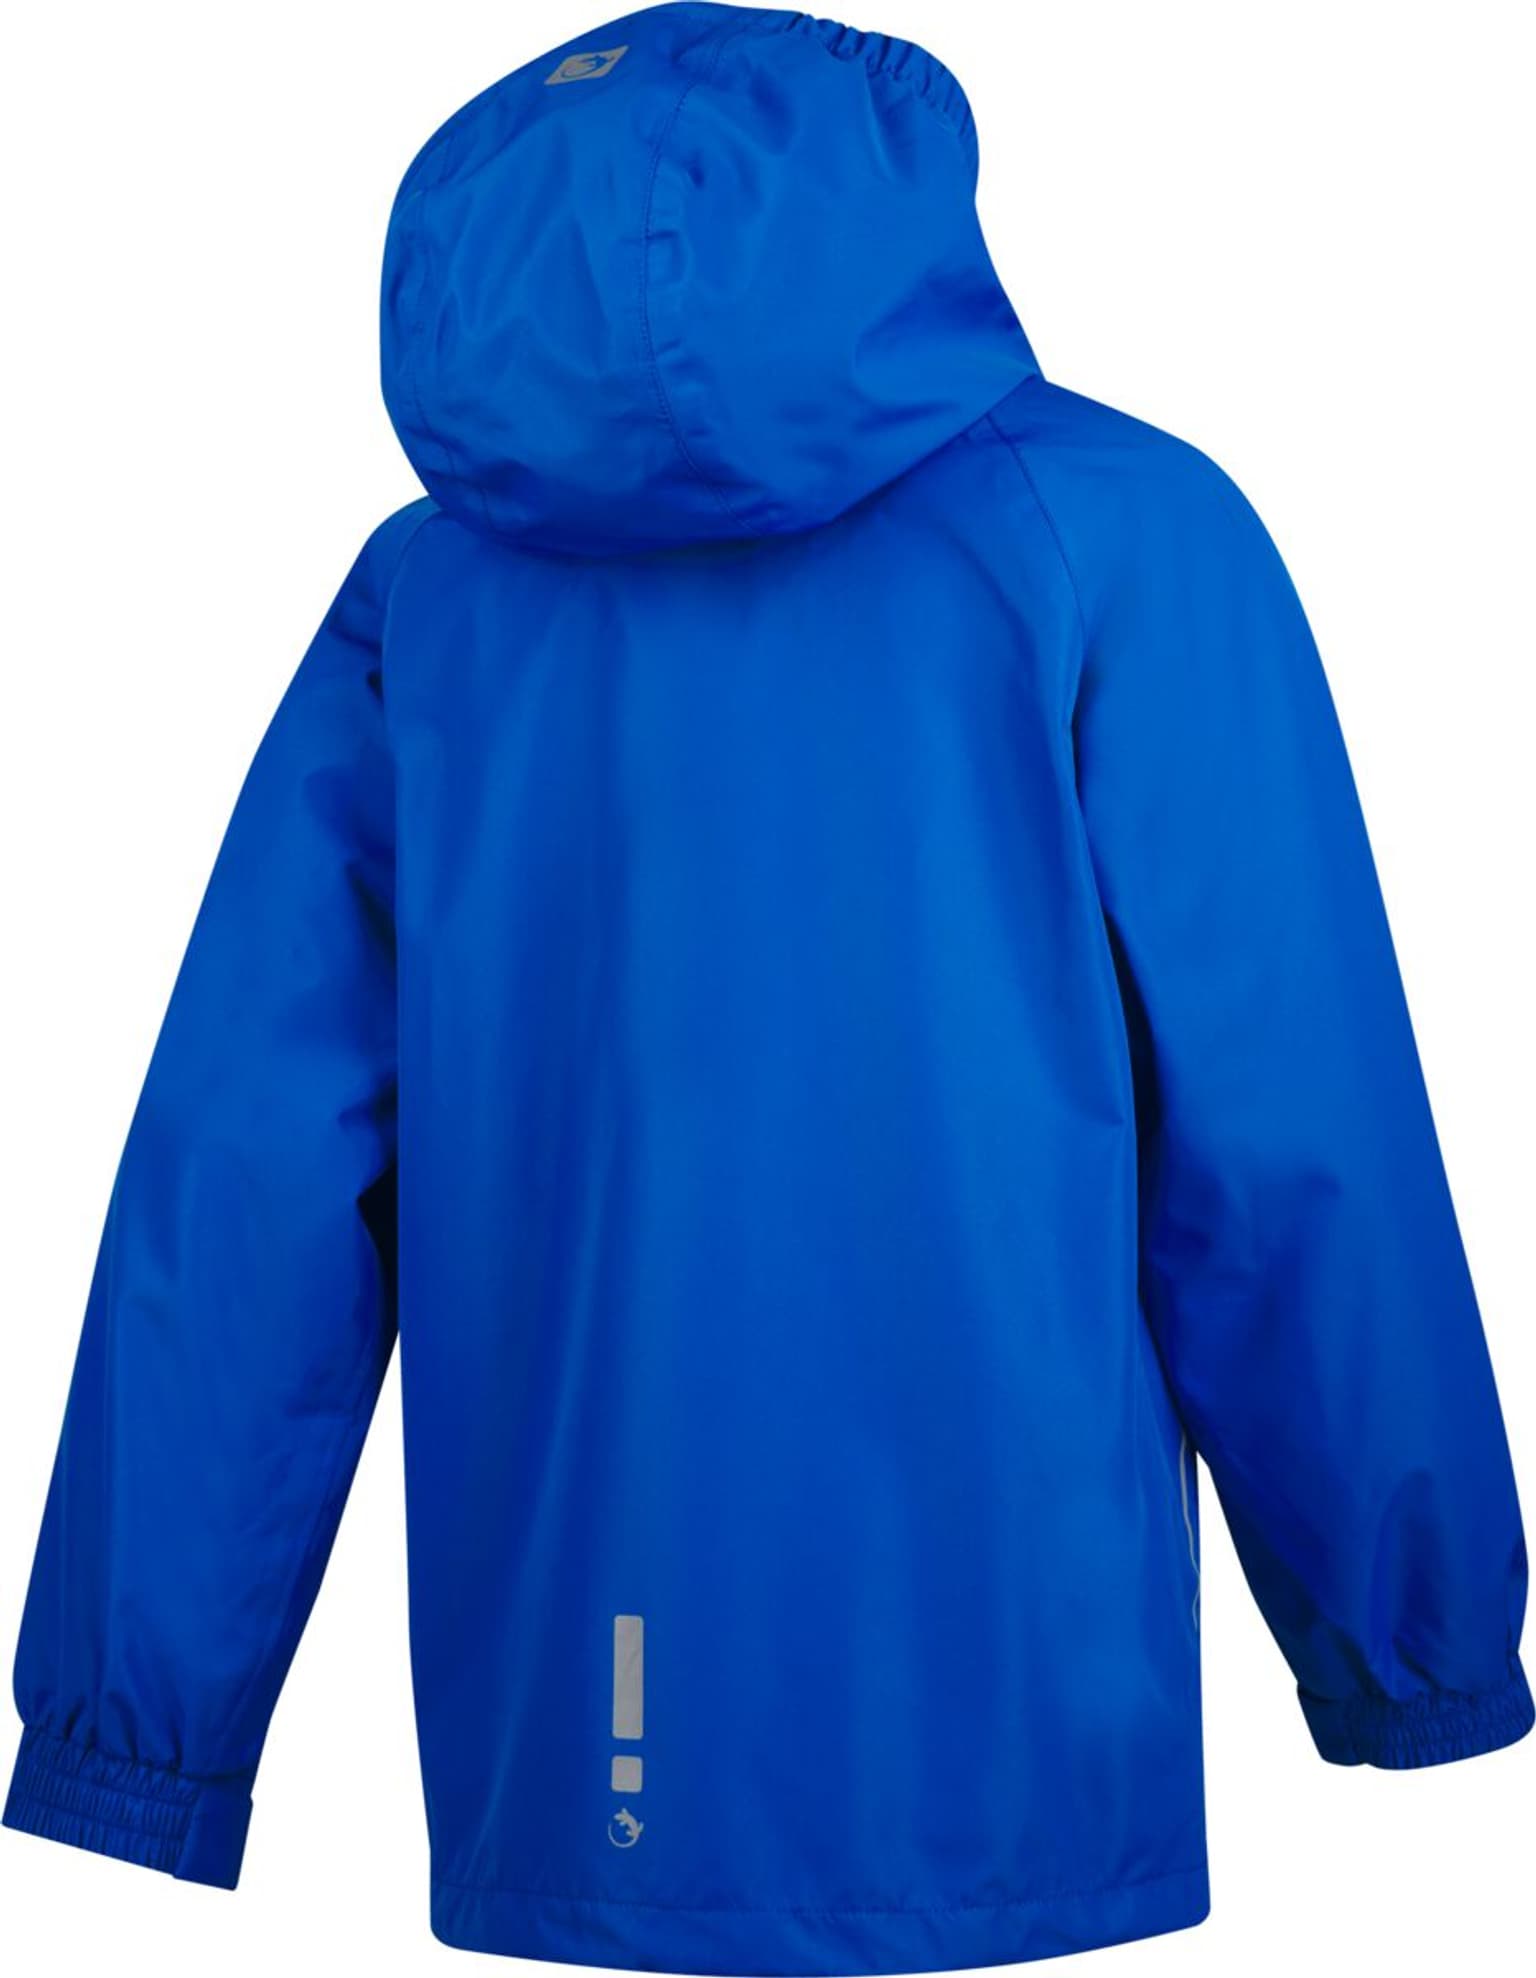 Trevolution Trevolution Regenjacke Regenjacke blu-reale 2